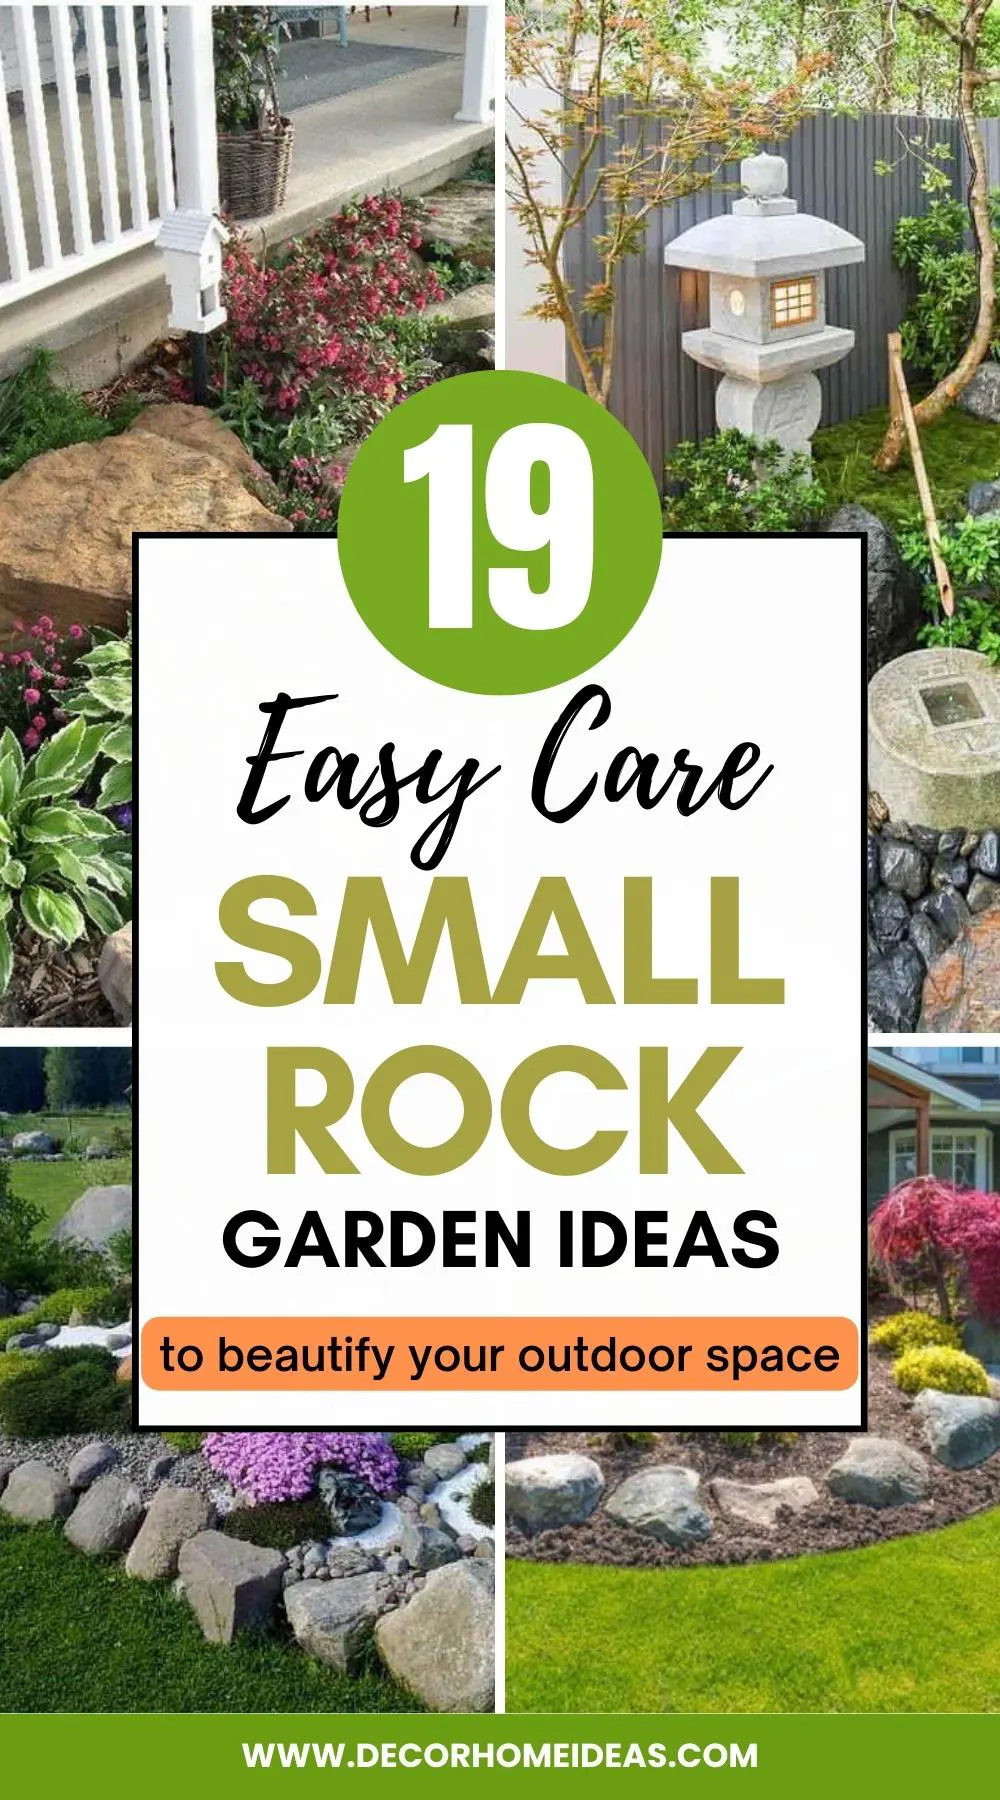 These rock garden ideas are perfect for those who want to enhance their outdoor space without the hassle of maintaining high-maintenance plants. They feature a variety of unique designs and easy-to-care-for rocks and succulents that will elevate your backyard or front yard with minimal effort.